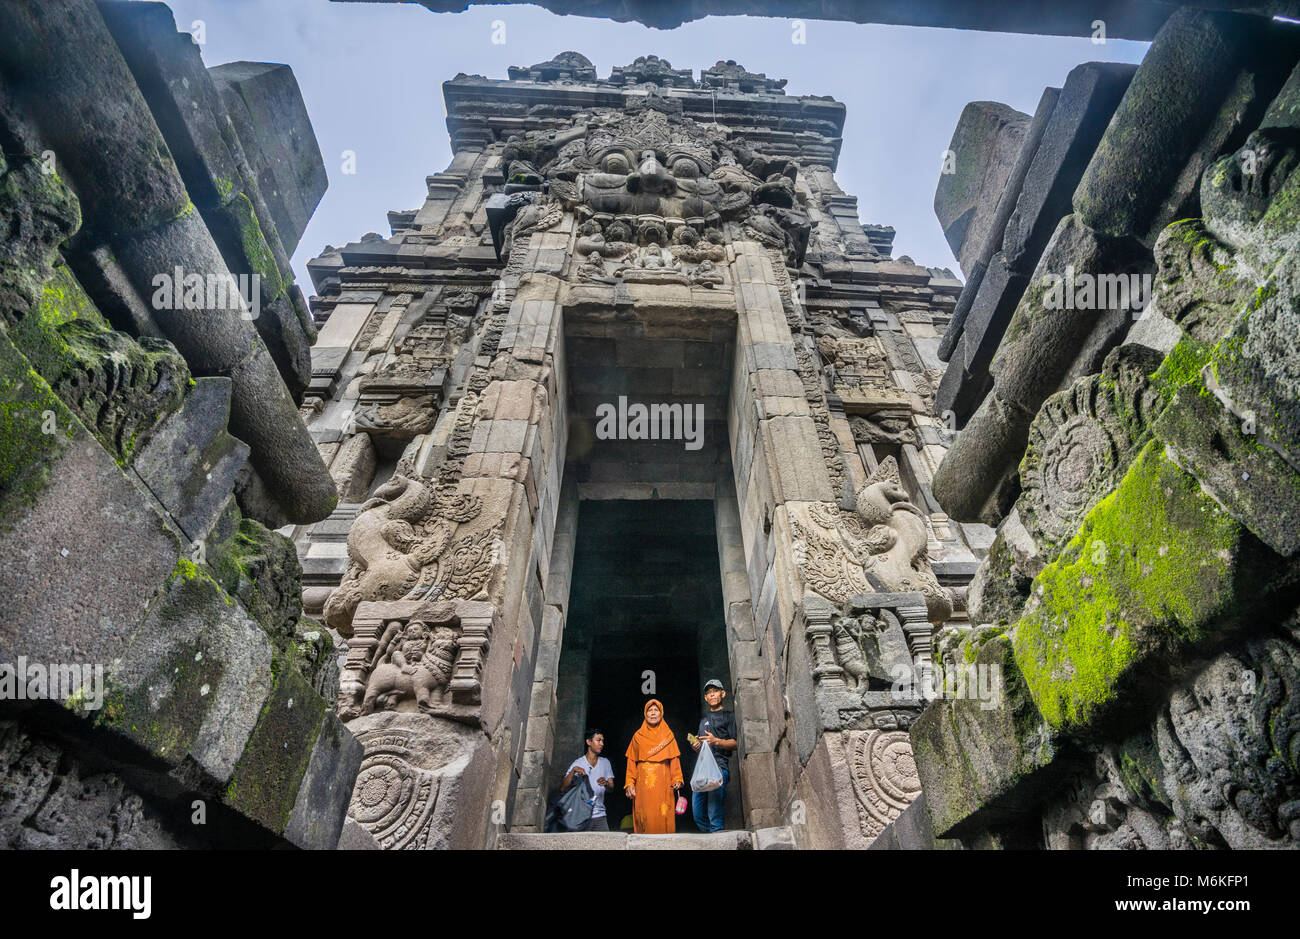 Indonesia, Central Java, entrance to the main chamber of the Shiva temple in mid-9th century Prambanan Hindu Temple complex Stock Photo